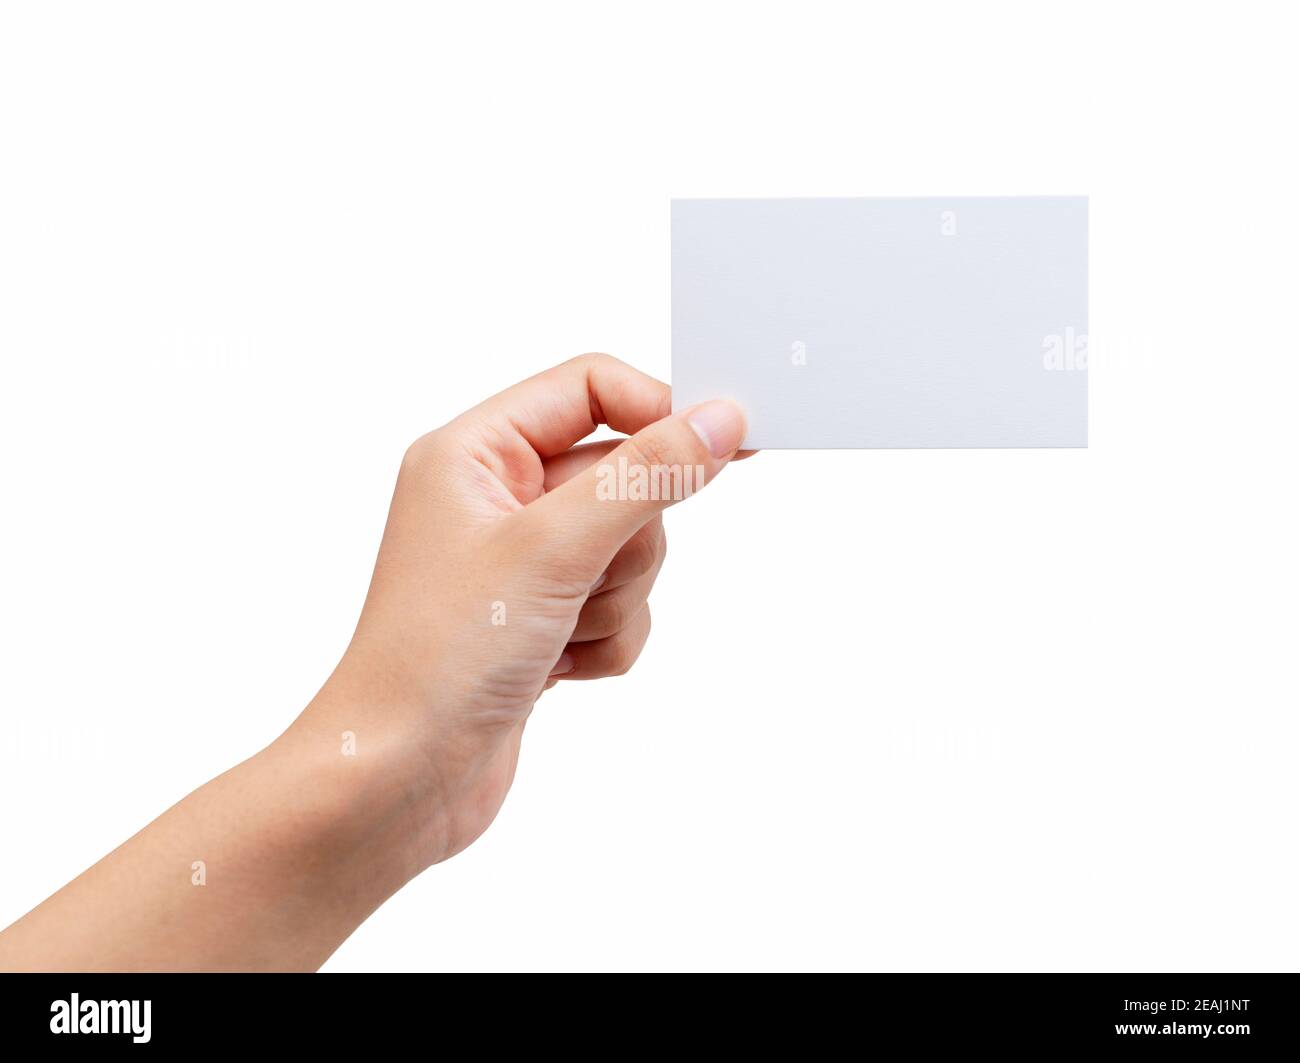 A woman's hand holding a plain business card on a white background Stock Photo